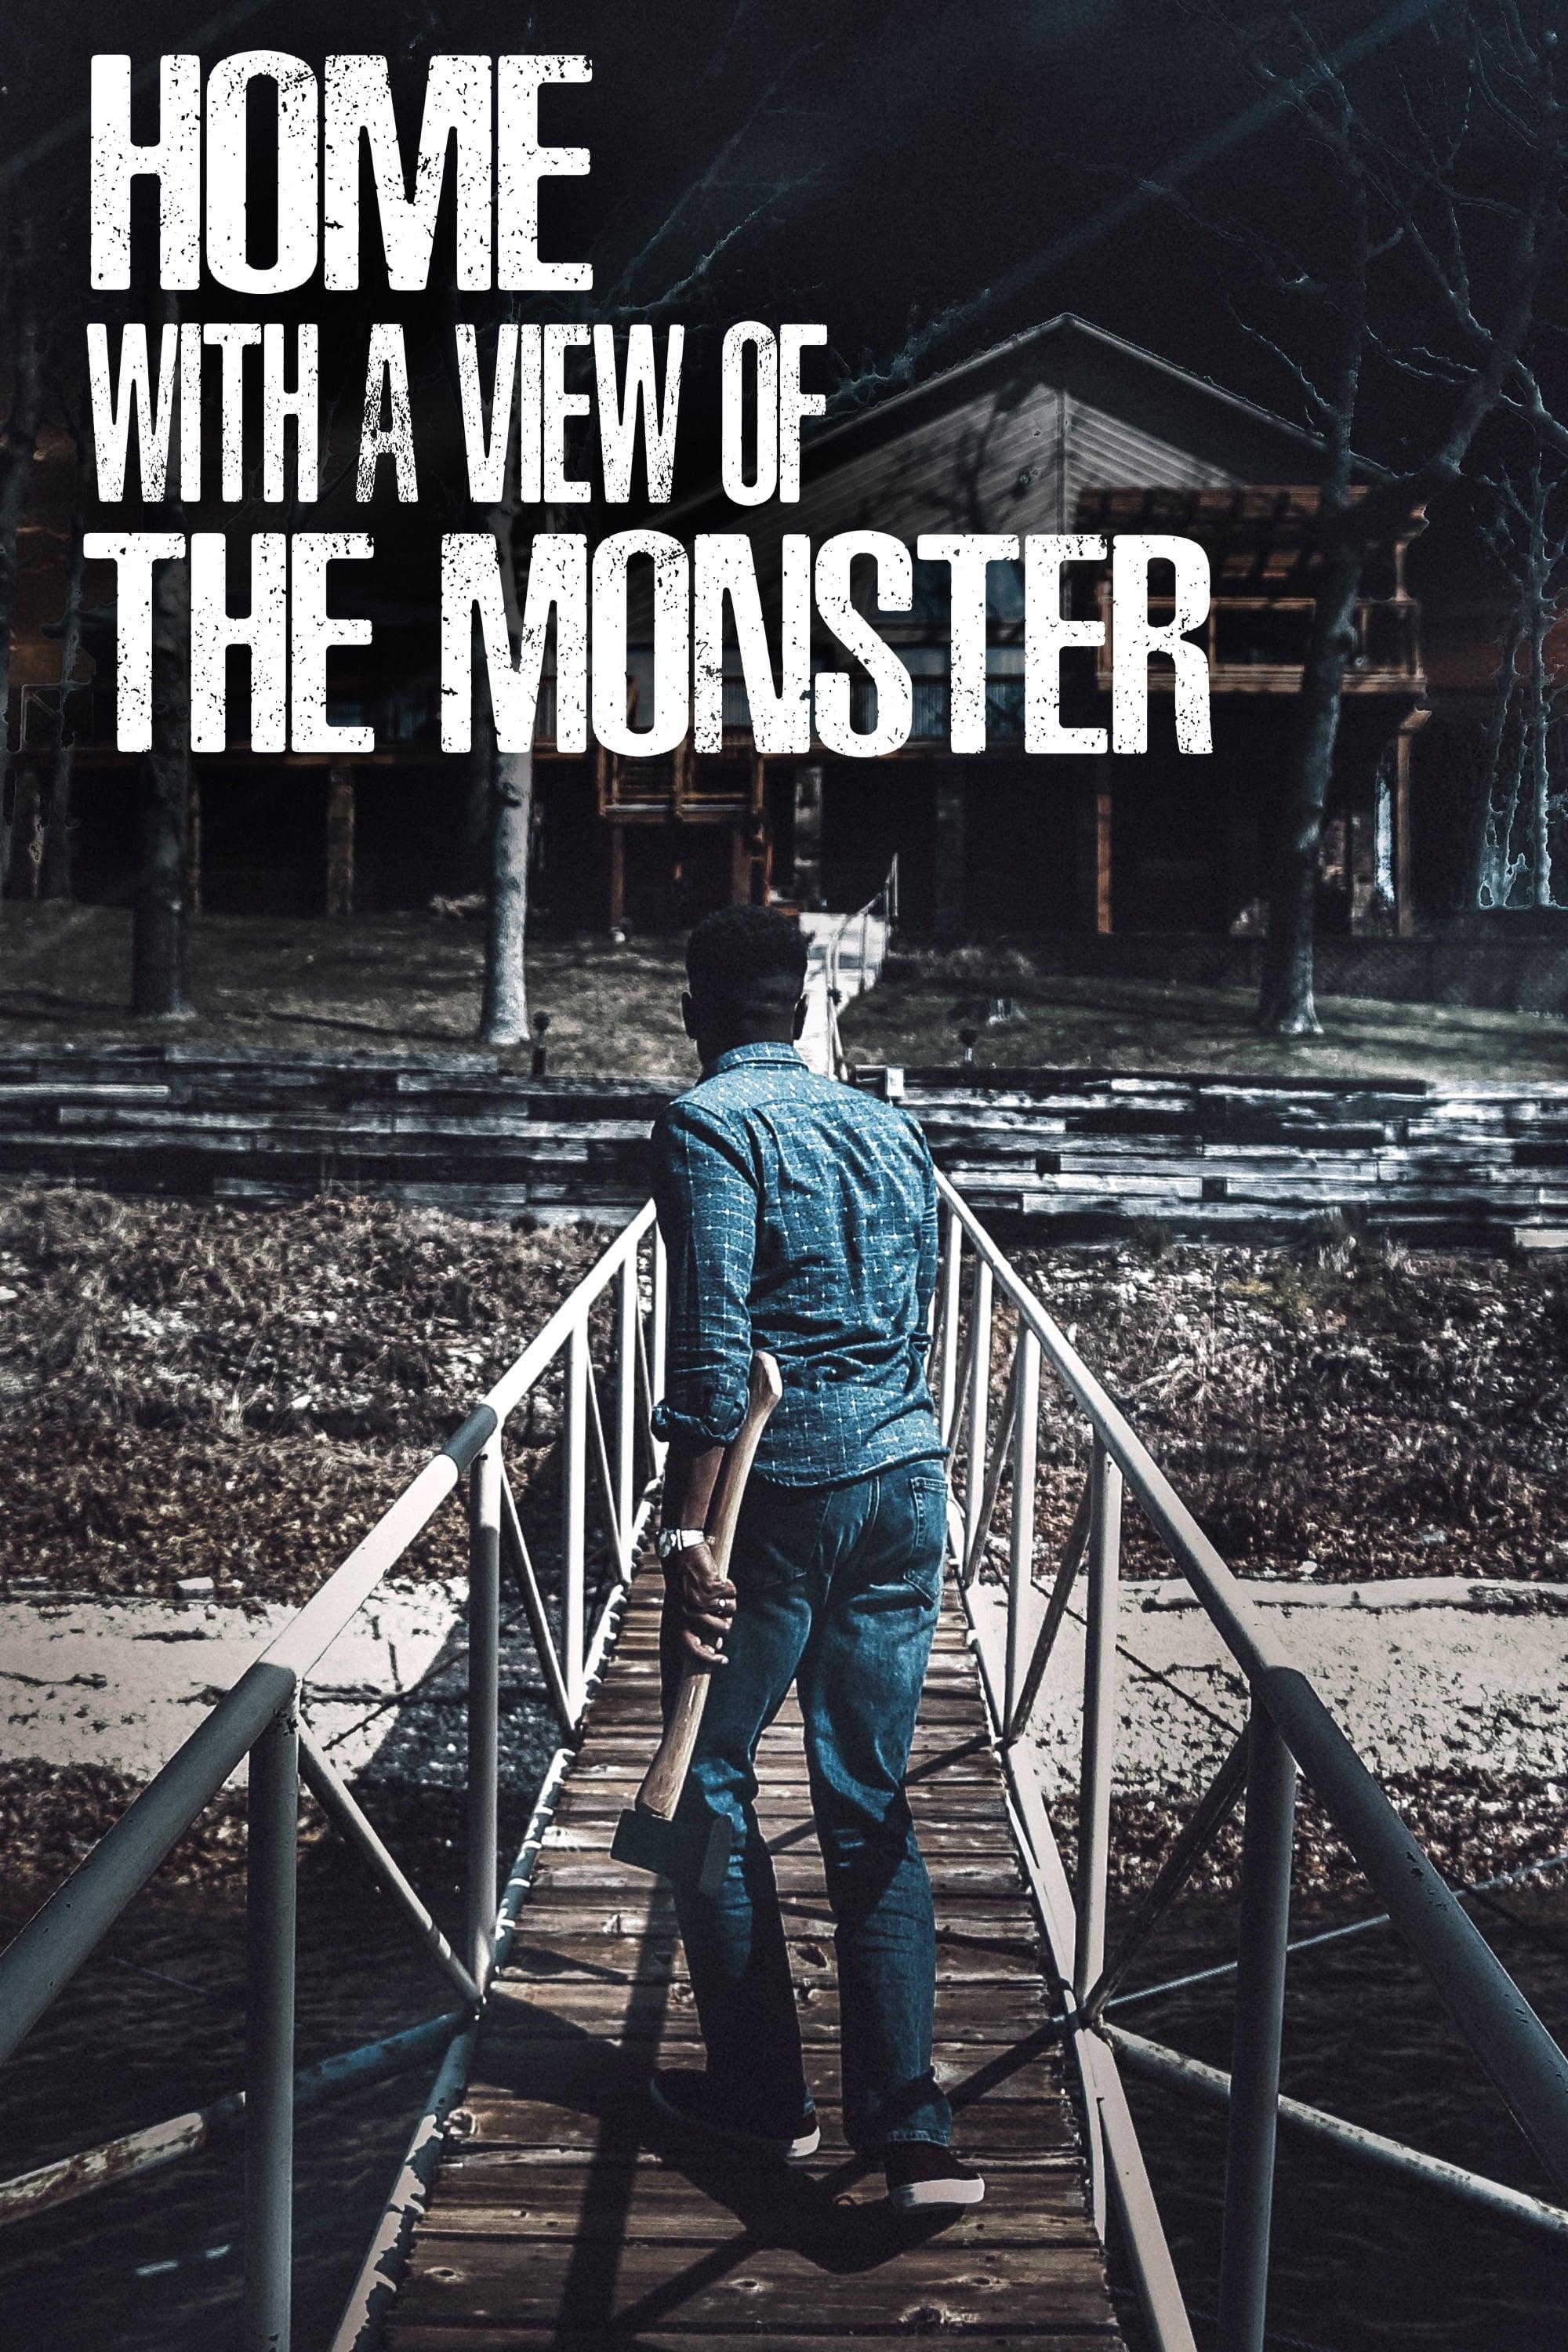 Home with a View of the Monster poster